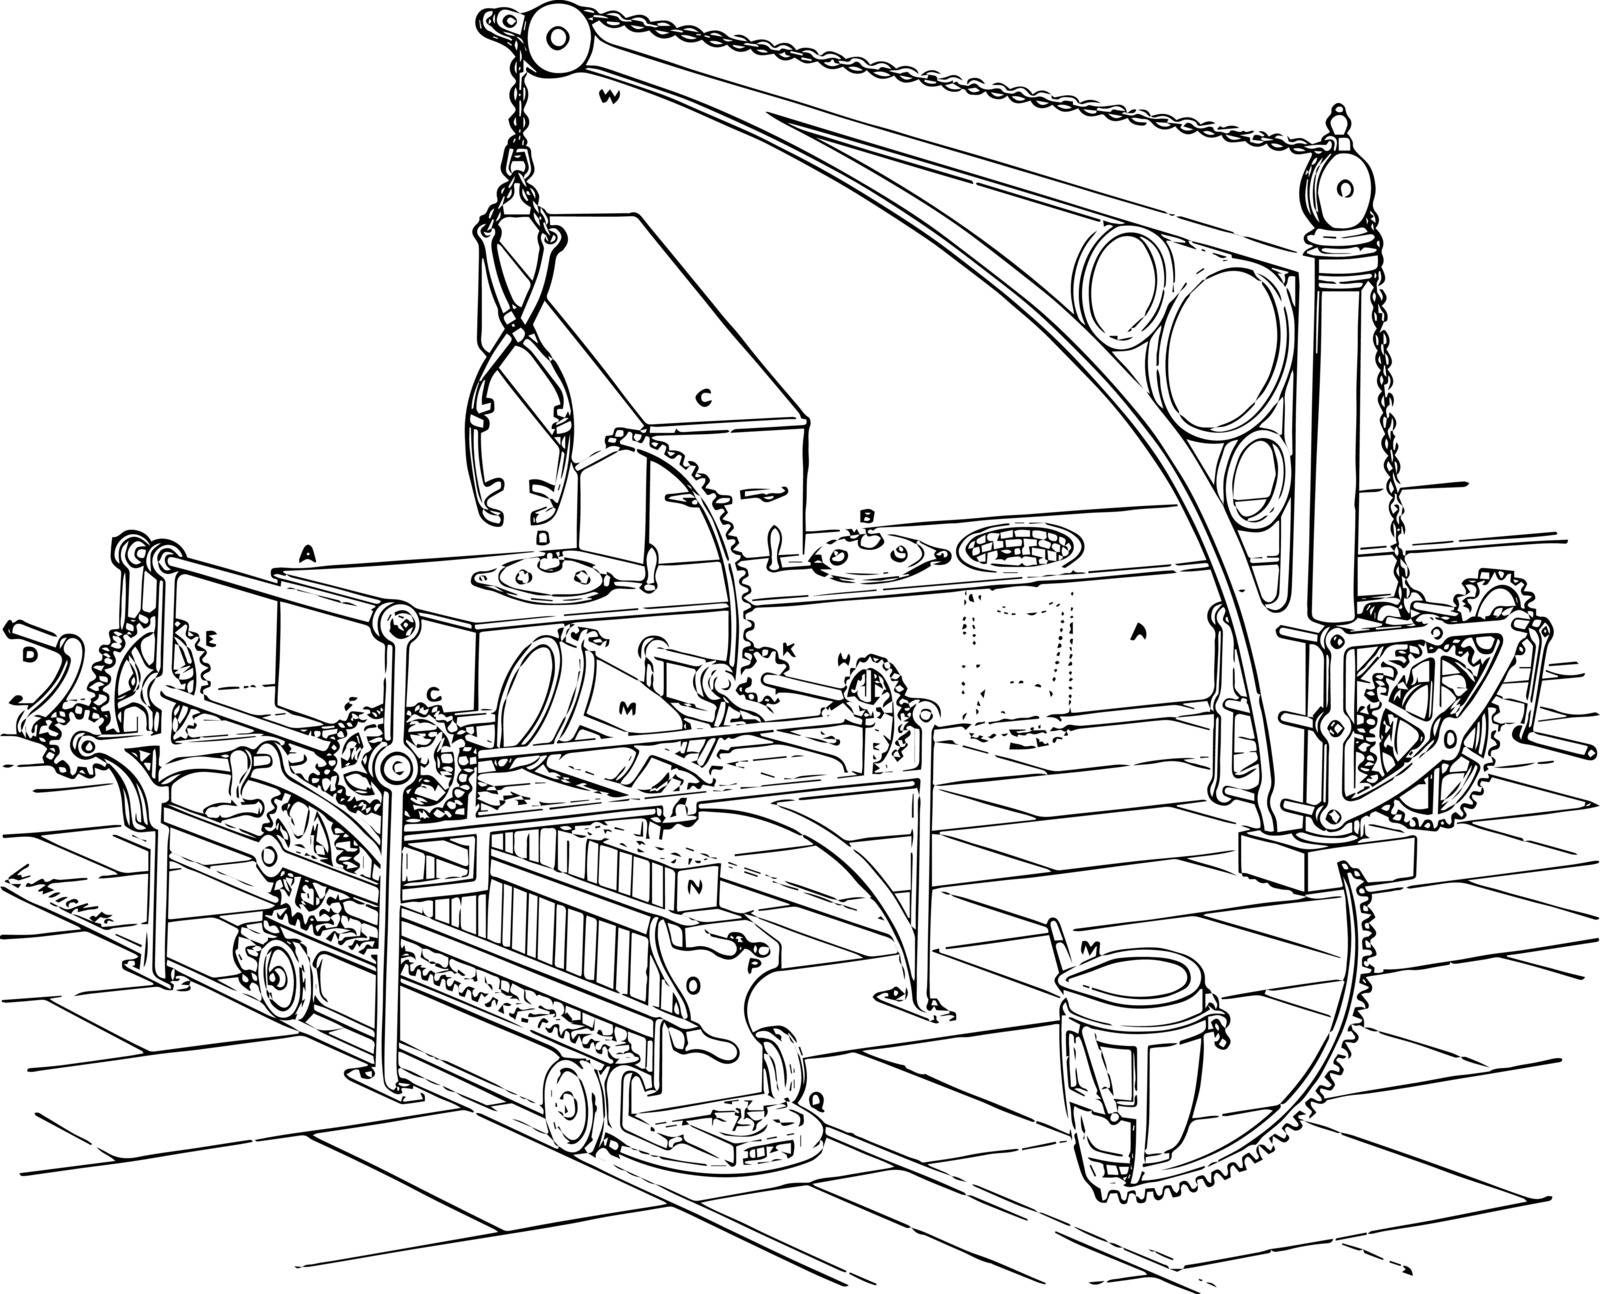 This illustration represents Furnace Apparatus for Minting where the metal is first melted in the crucible in flue vintage line drawing or engraving illustration.